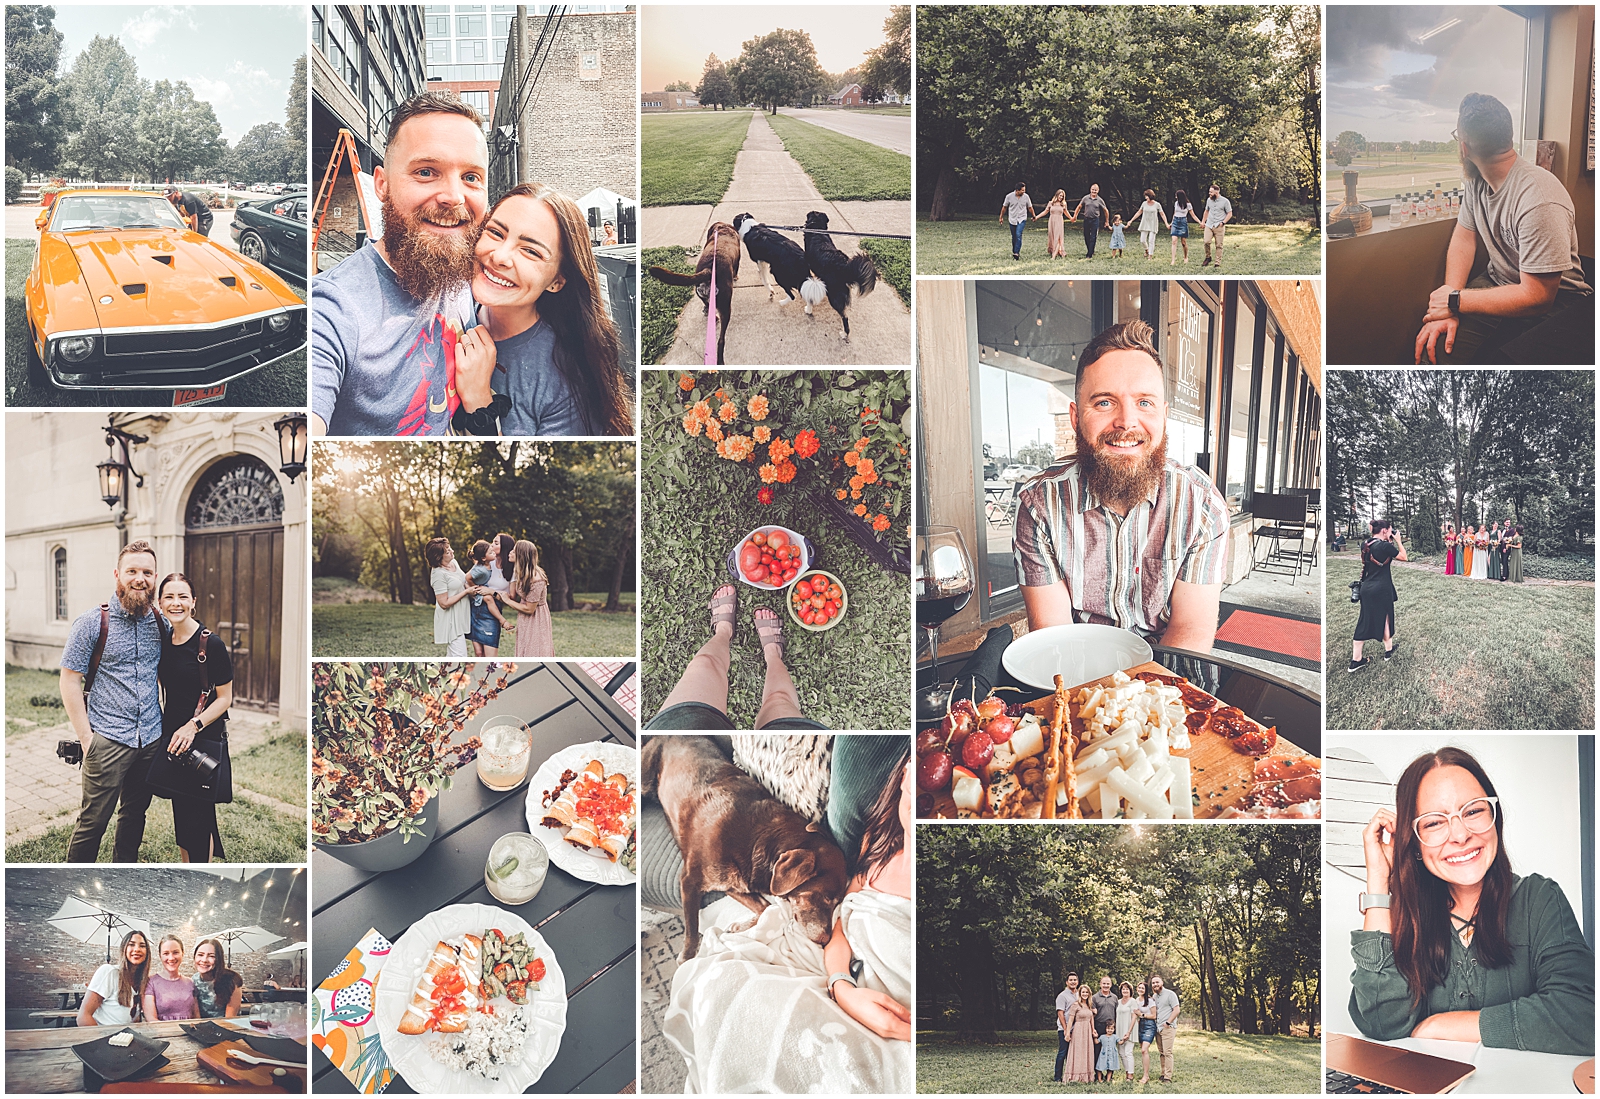 A look at the August 2021 My Life Mondays monthly blog recap with Chicagoland wedding photographer and mentor Kara Evans Photographer.